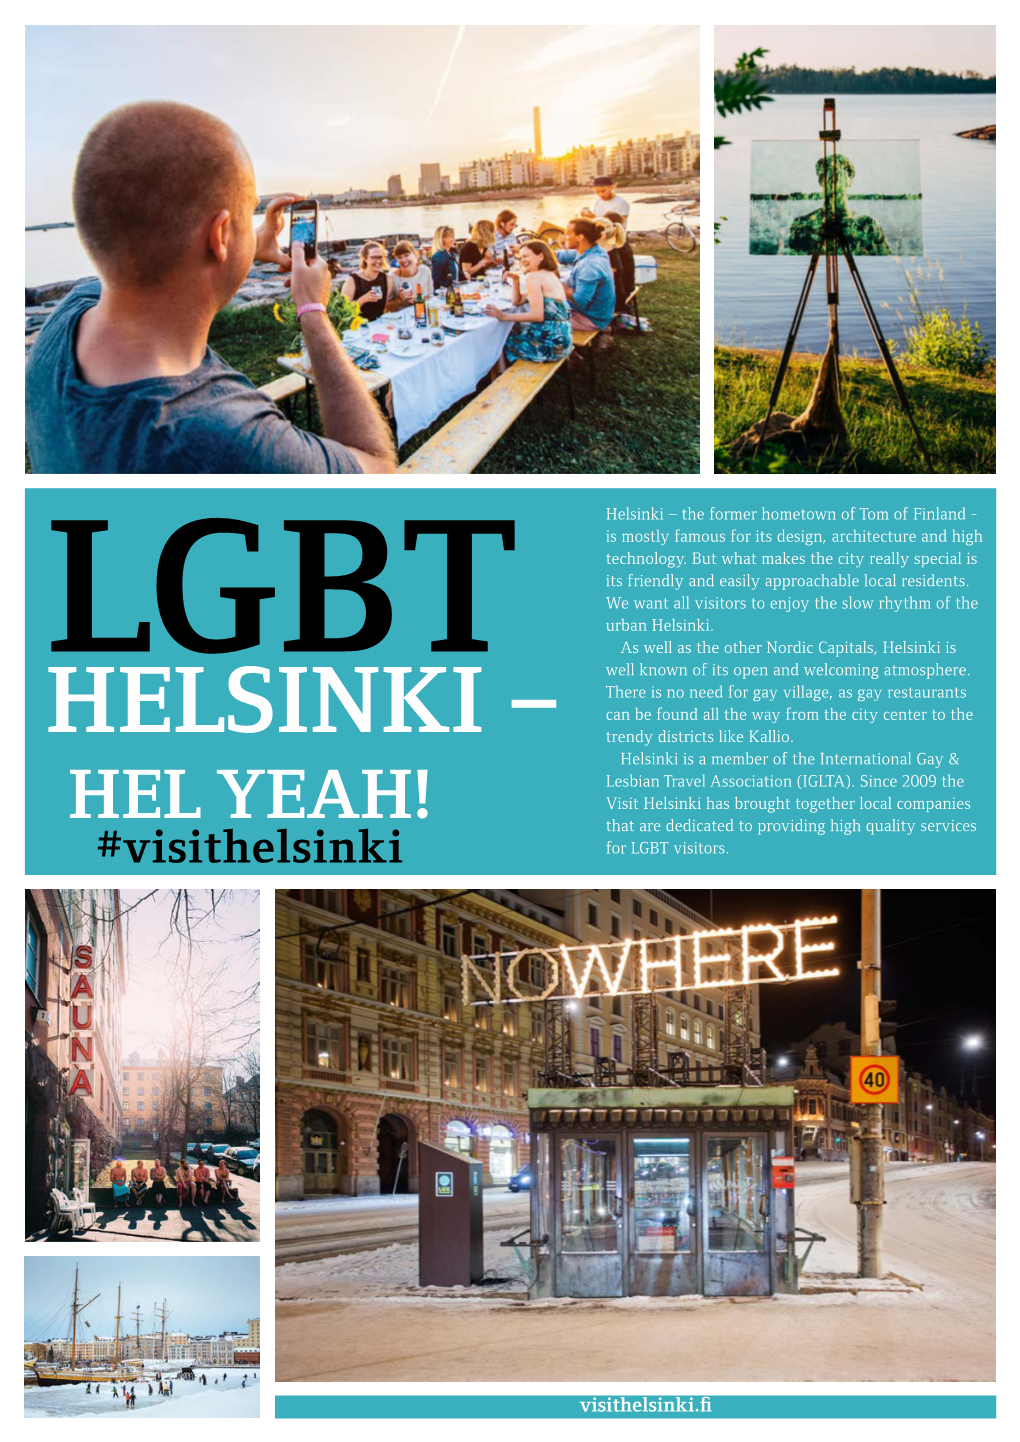 Helsinki – the Former Hometown of Tom of Finland - Is Mostly Famous for Its Design, Architecture and High Technology